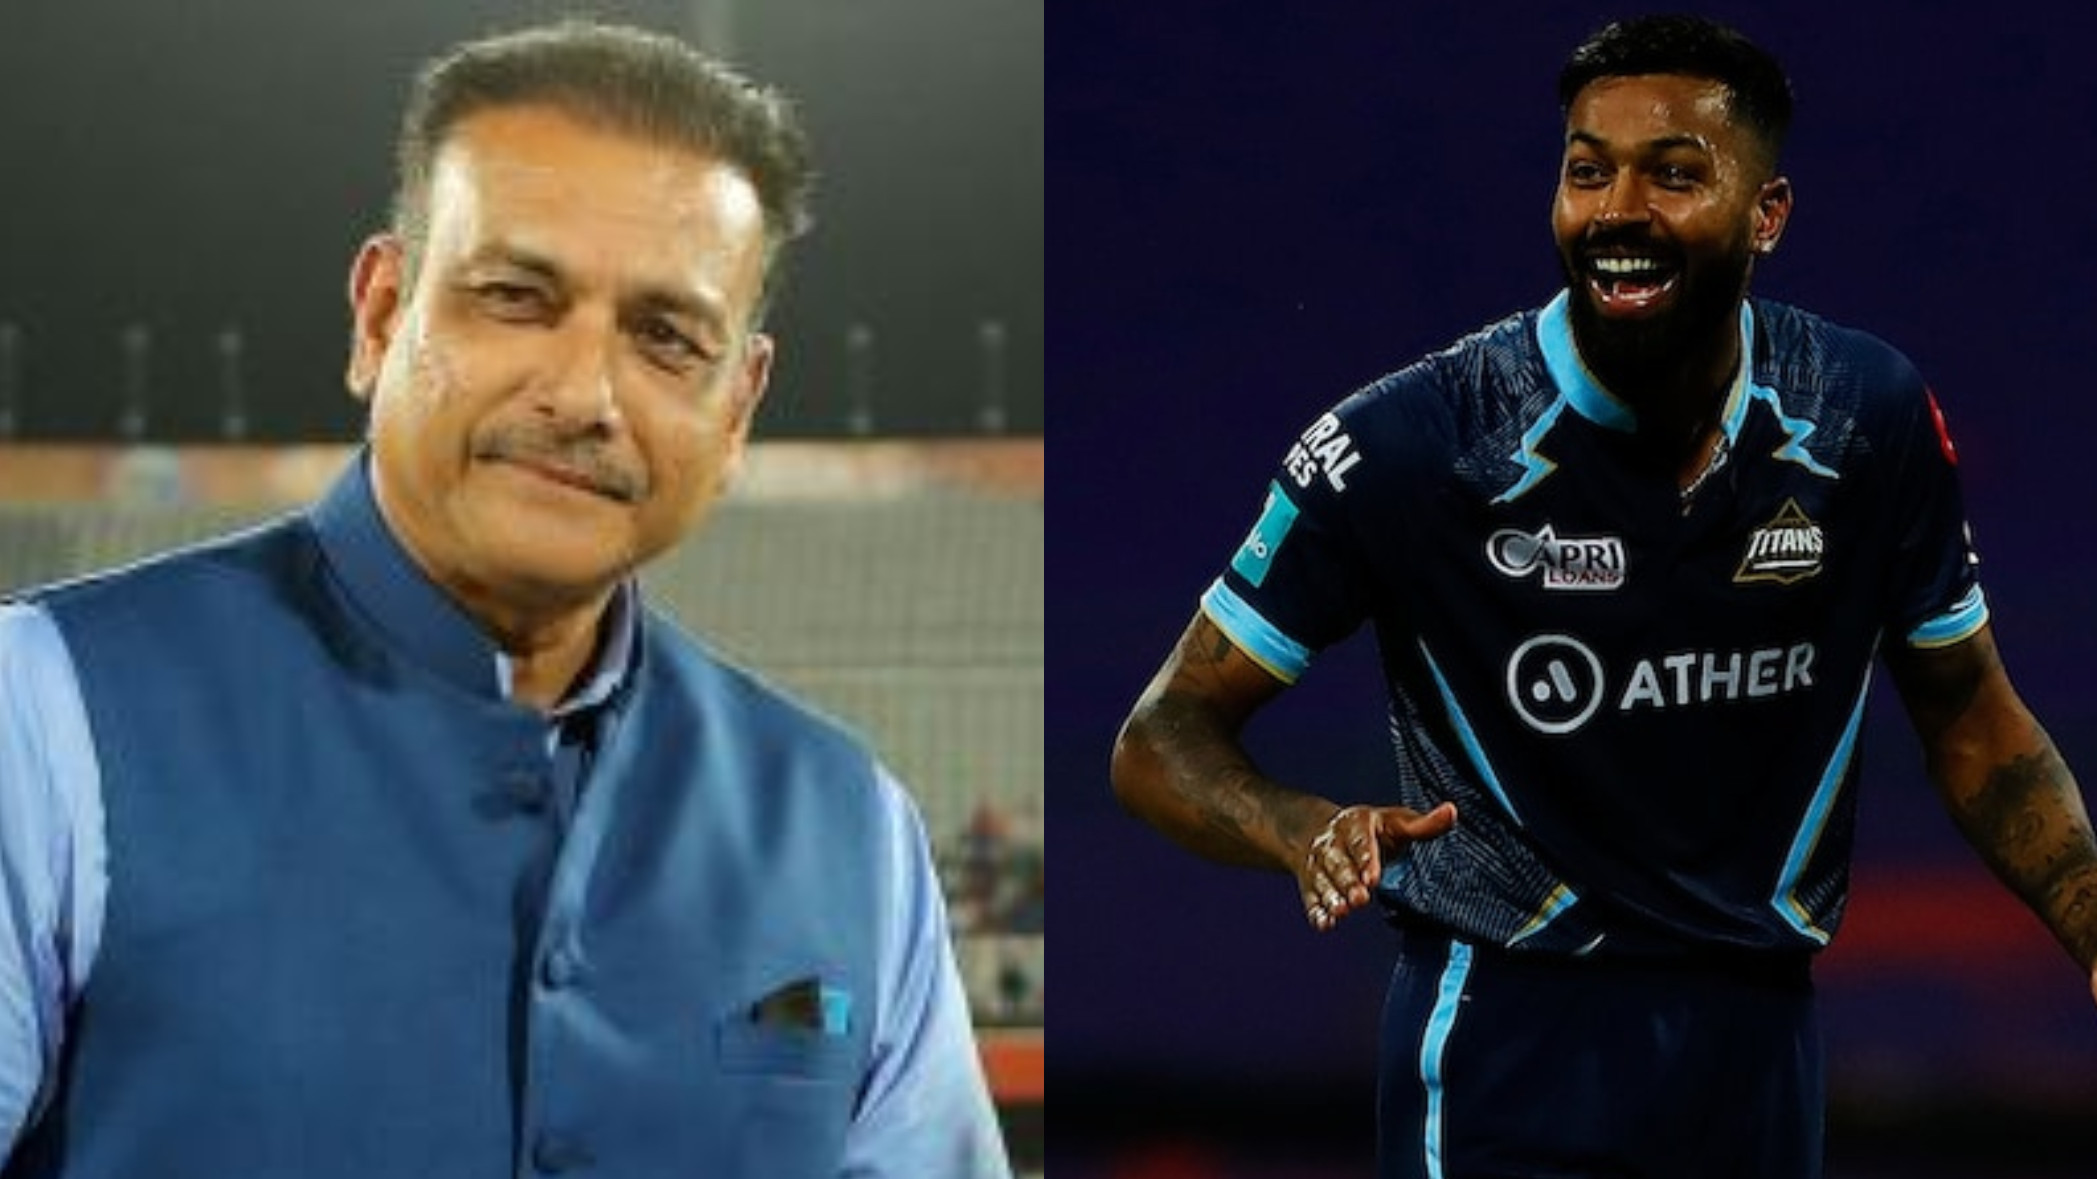  IPL 2022: “Those 4 overs mattered a lot”- Shastri lauds Hardik’s comeback as an all-rounder